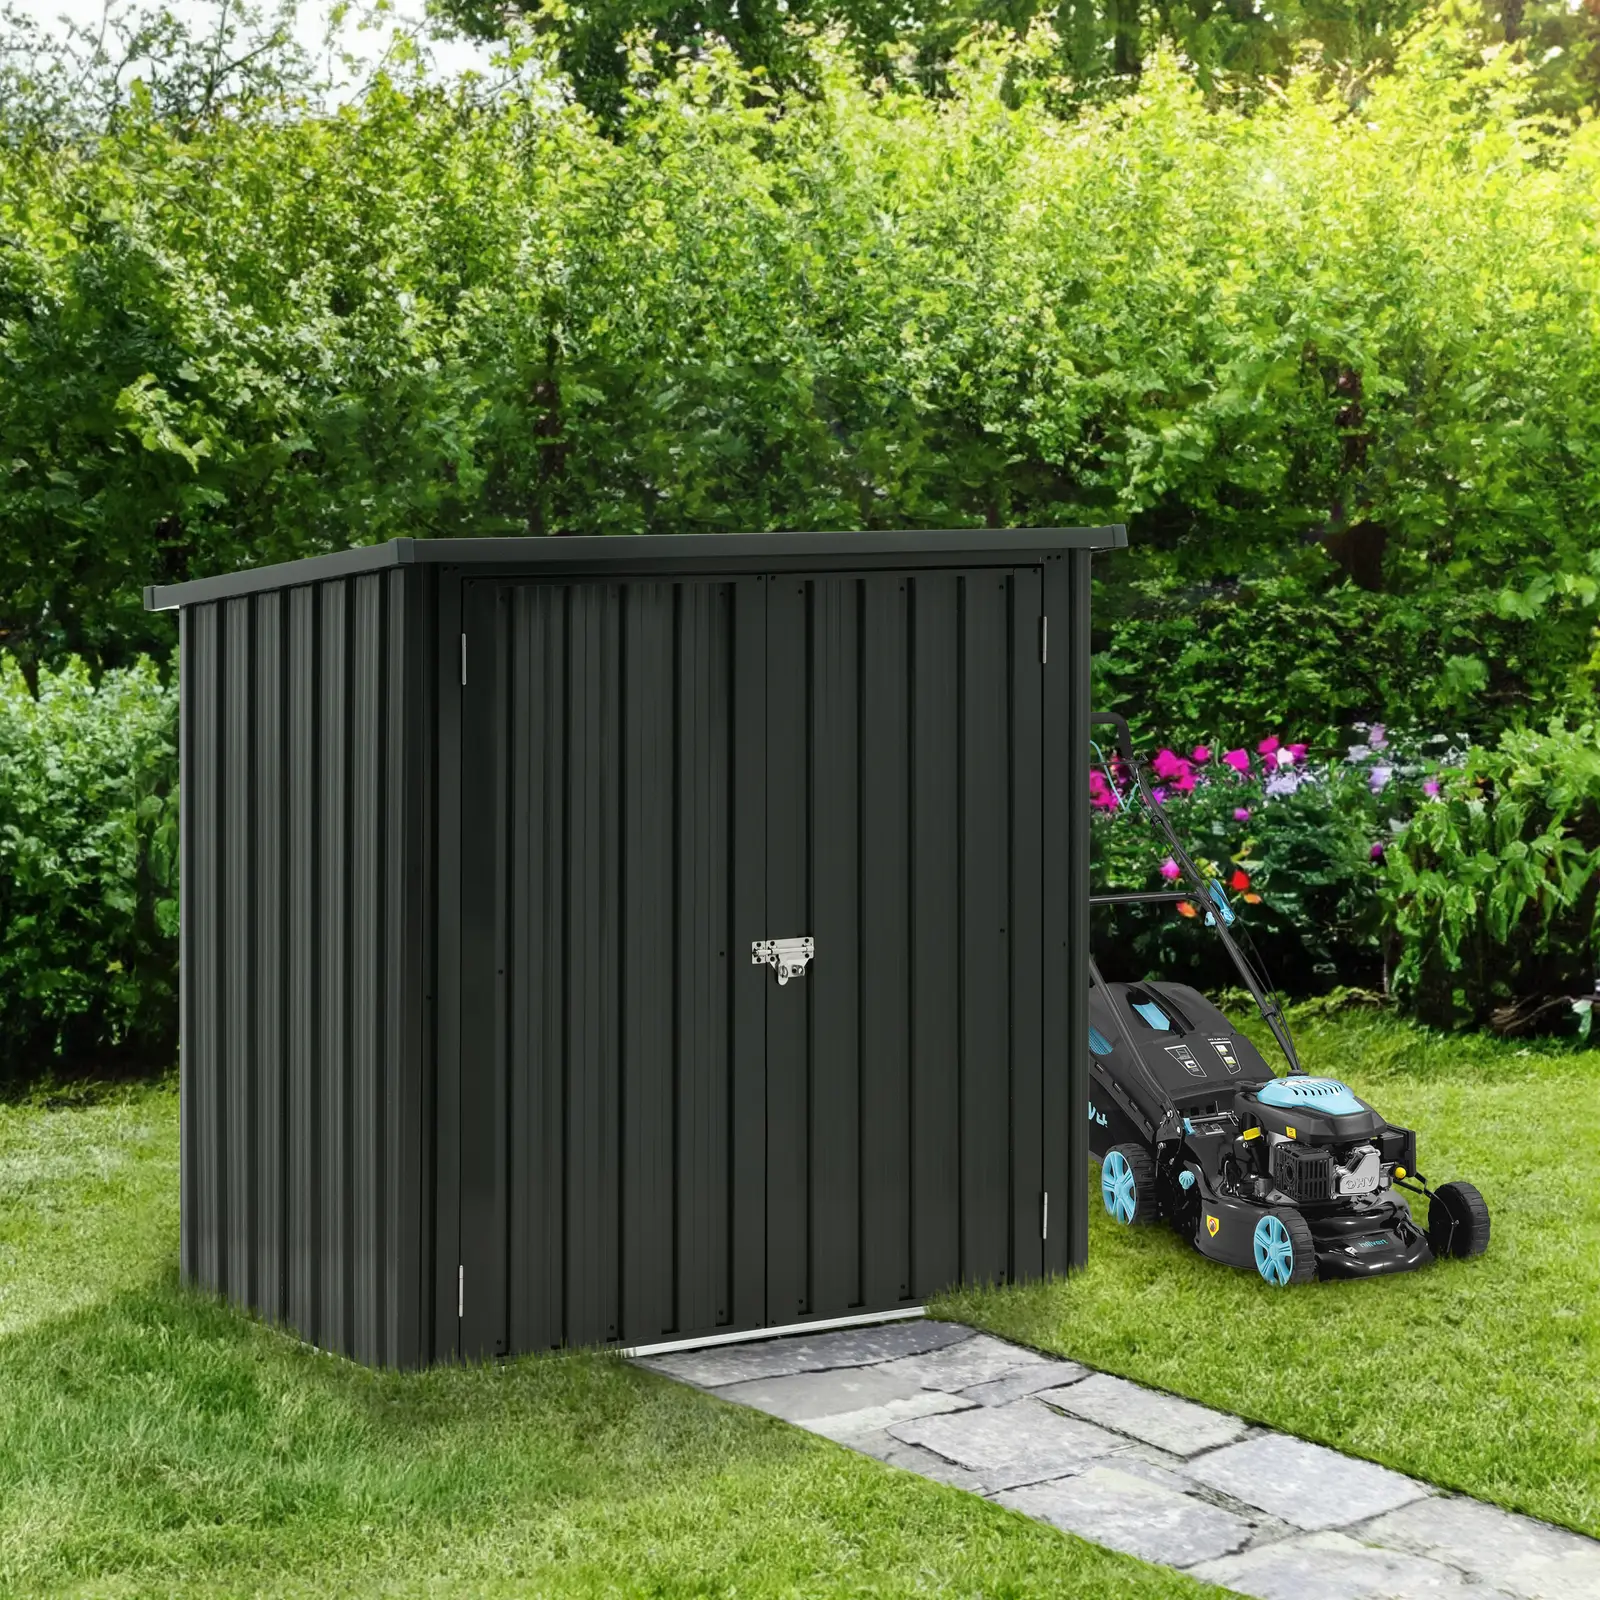 Factory second Metal Tool Shed - 145 x 86 x 135 cm